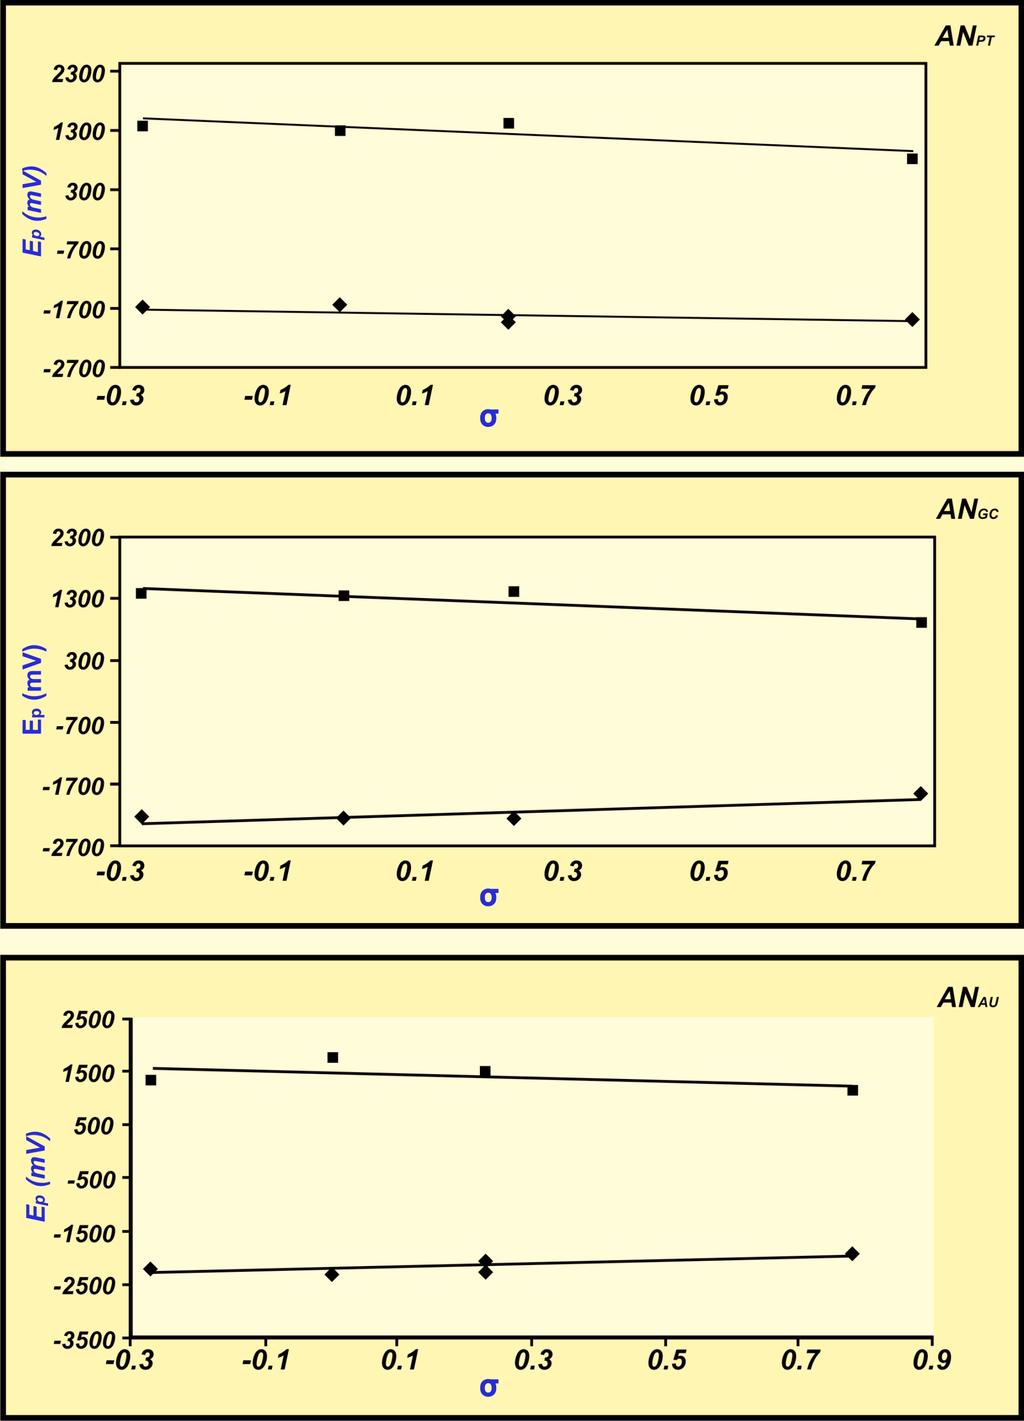 12 The pen Electrochemistry Journal, 2009, Volume 1 A.A. El Maghraby Fig. (3).